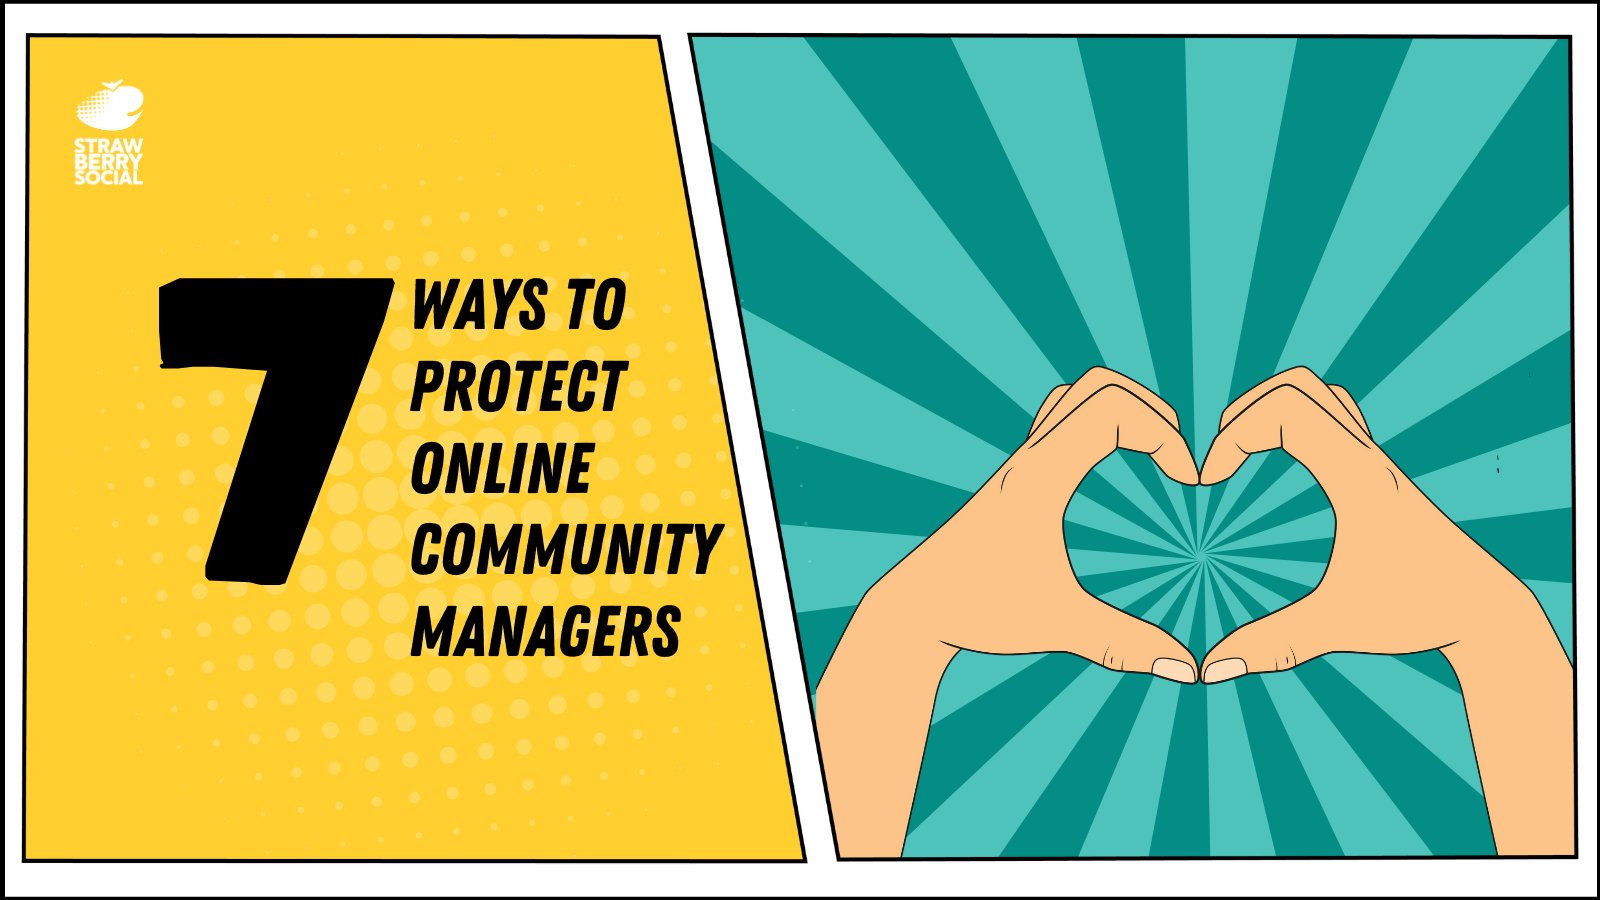 Text on the left says '7 ways to protect online community managers' Graphic on the right shows hands making a heart shape